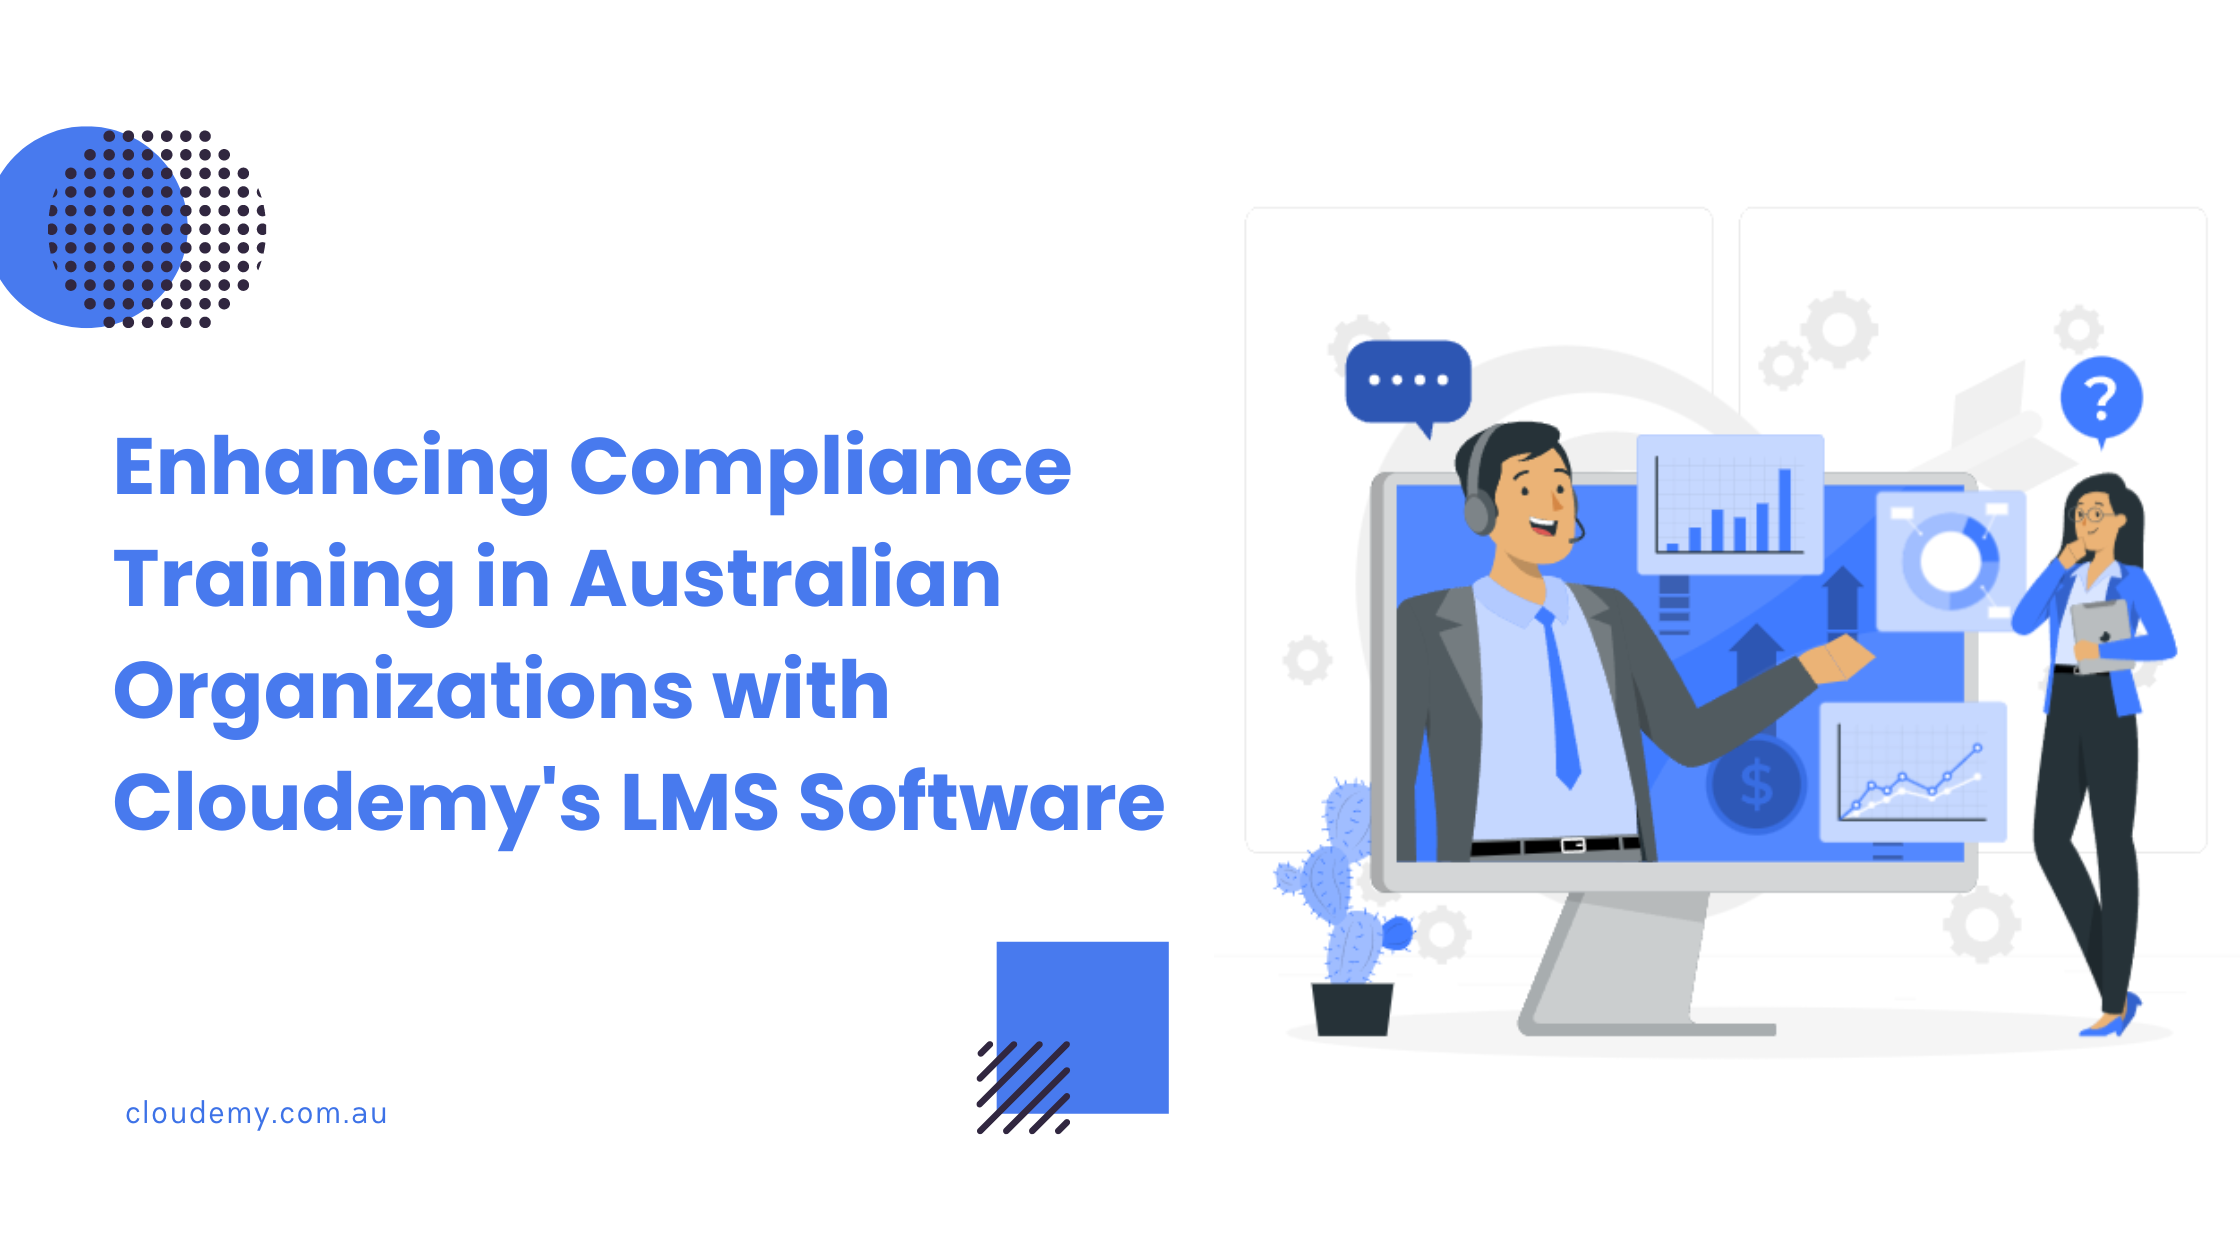 Enhancing Compliance Training in Australian Organizations with Cloudemy's LMS Software